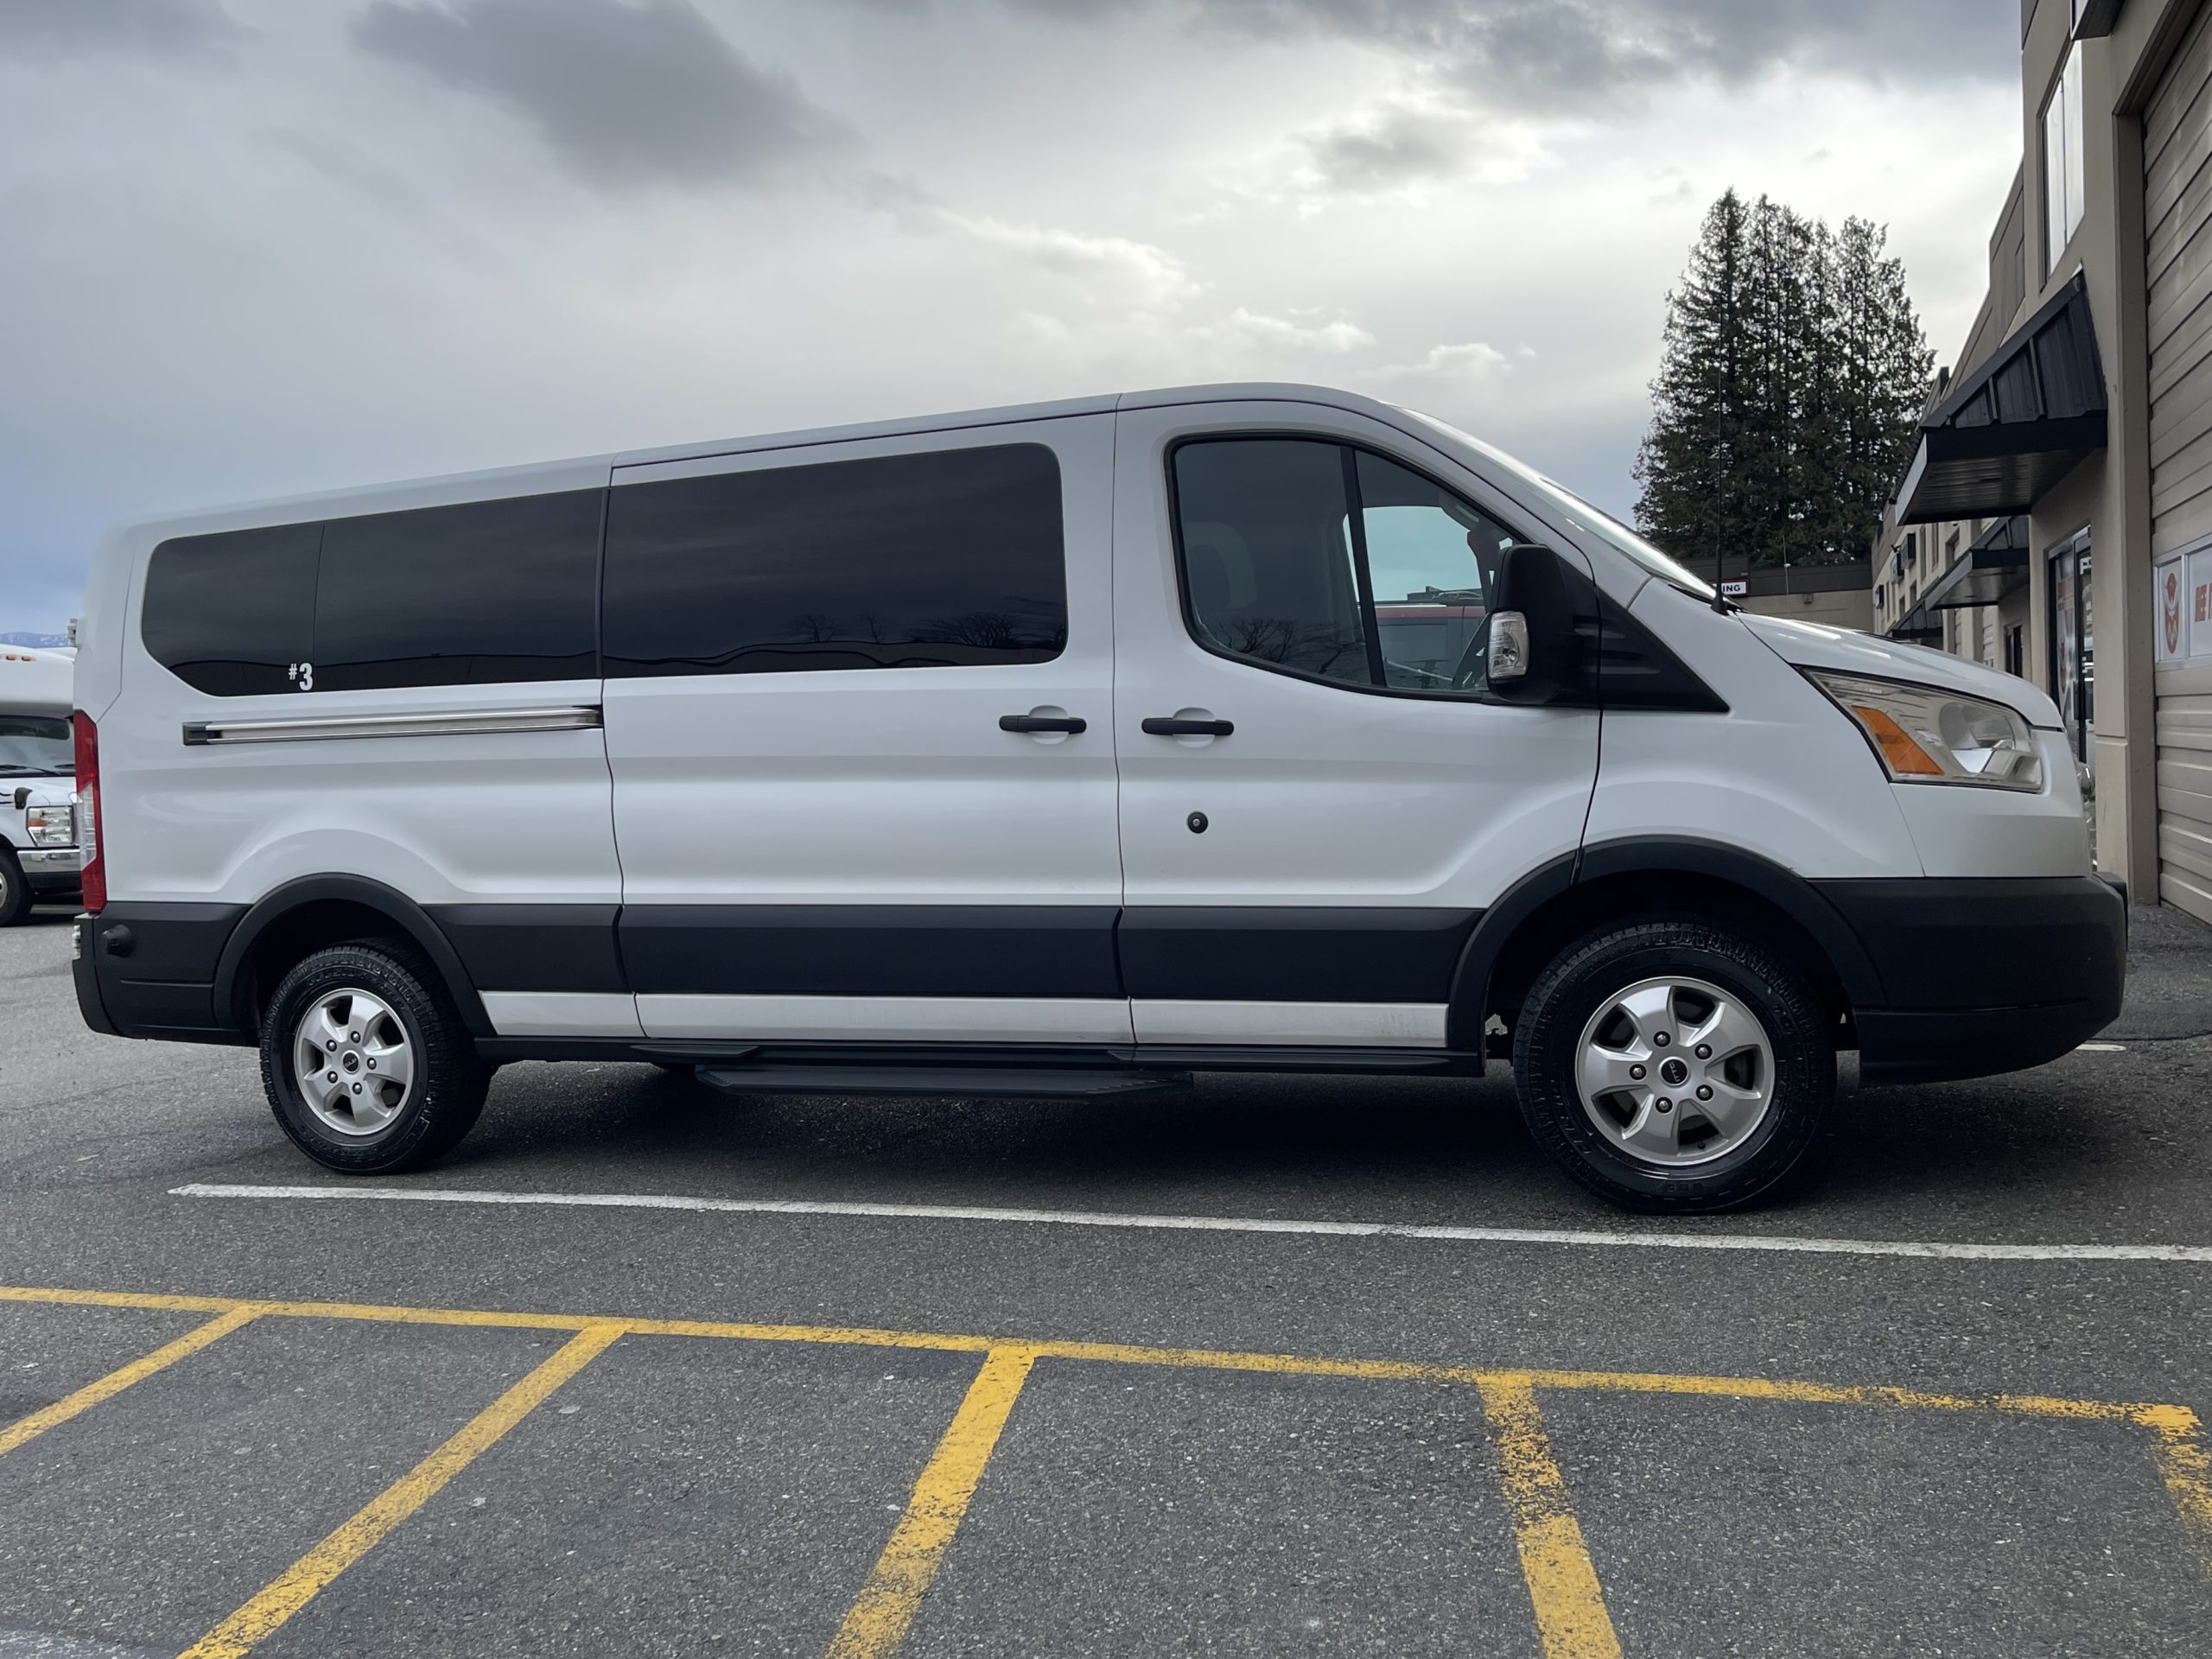 ITTG's Sprinter bans are capable of comfortably seating 15 people